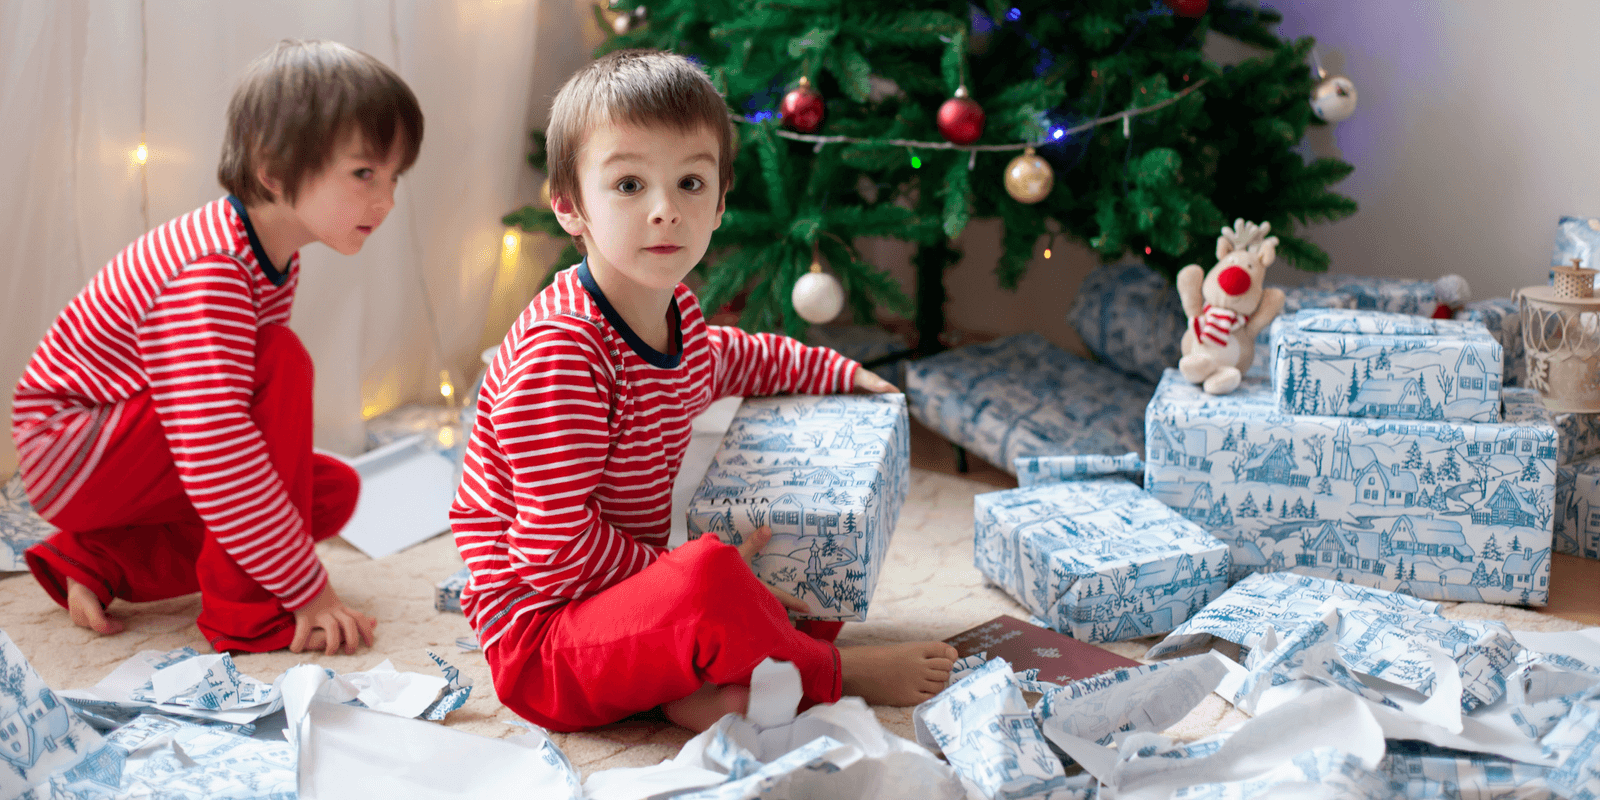 Considering Christmas gifts for children whose parents have separated